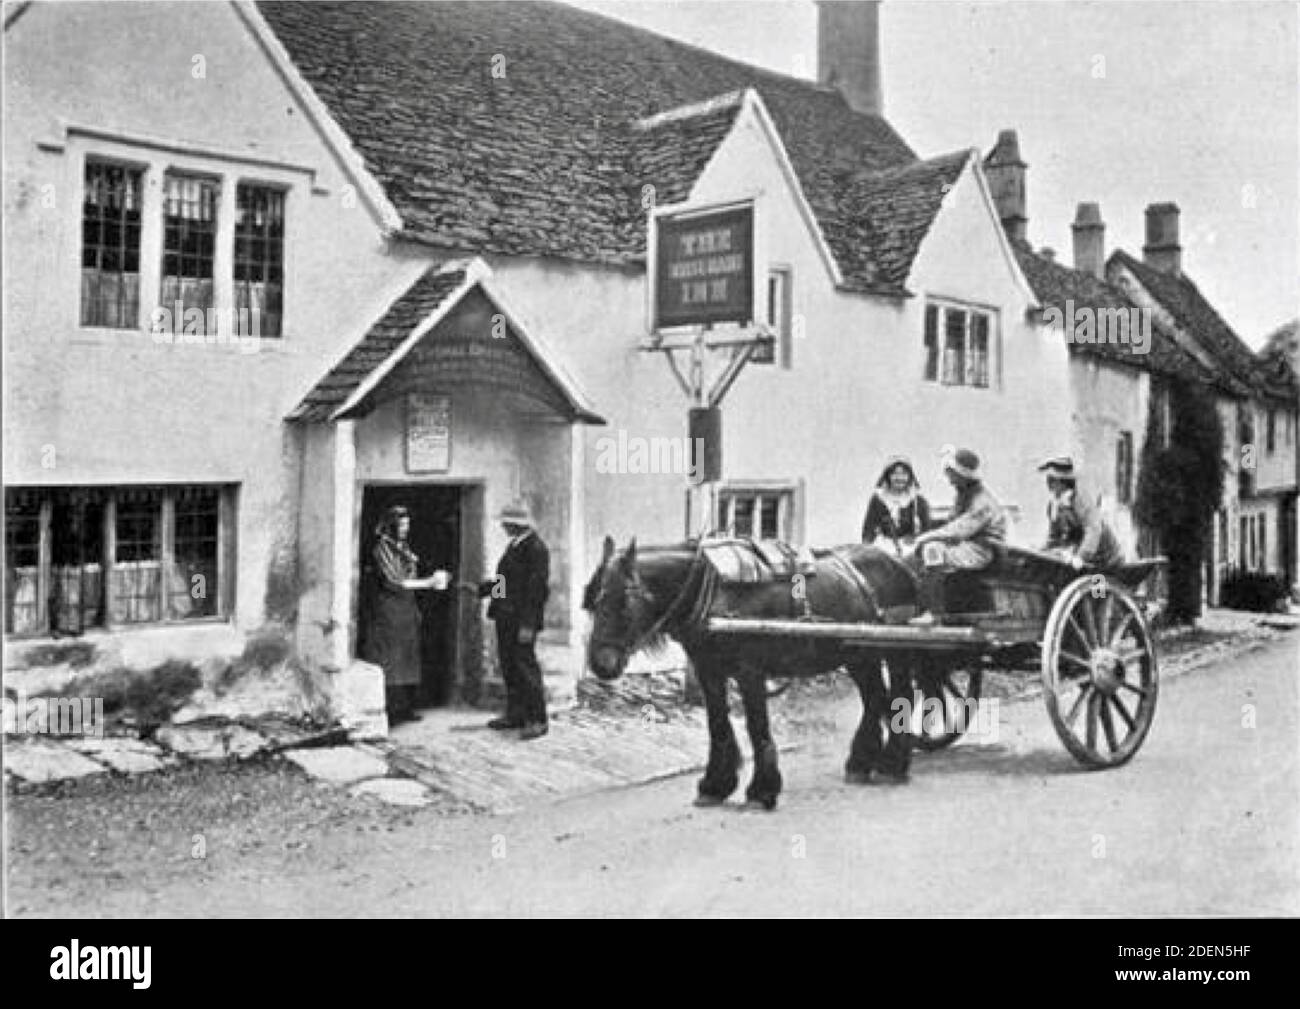 Old photograph by Graystone Bird of The White Hart Inn, Castle Combe, Wiltshire. A mug of cider is served outside the pub as a cart and horse standby. Stock Photo